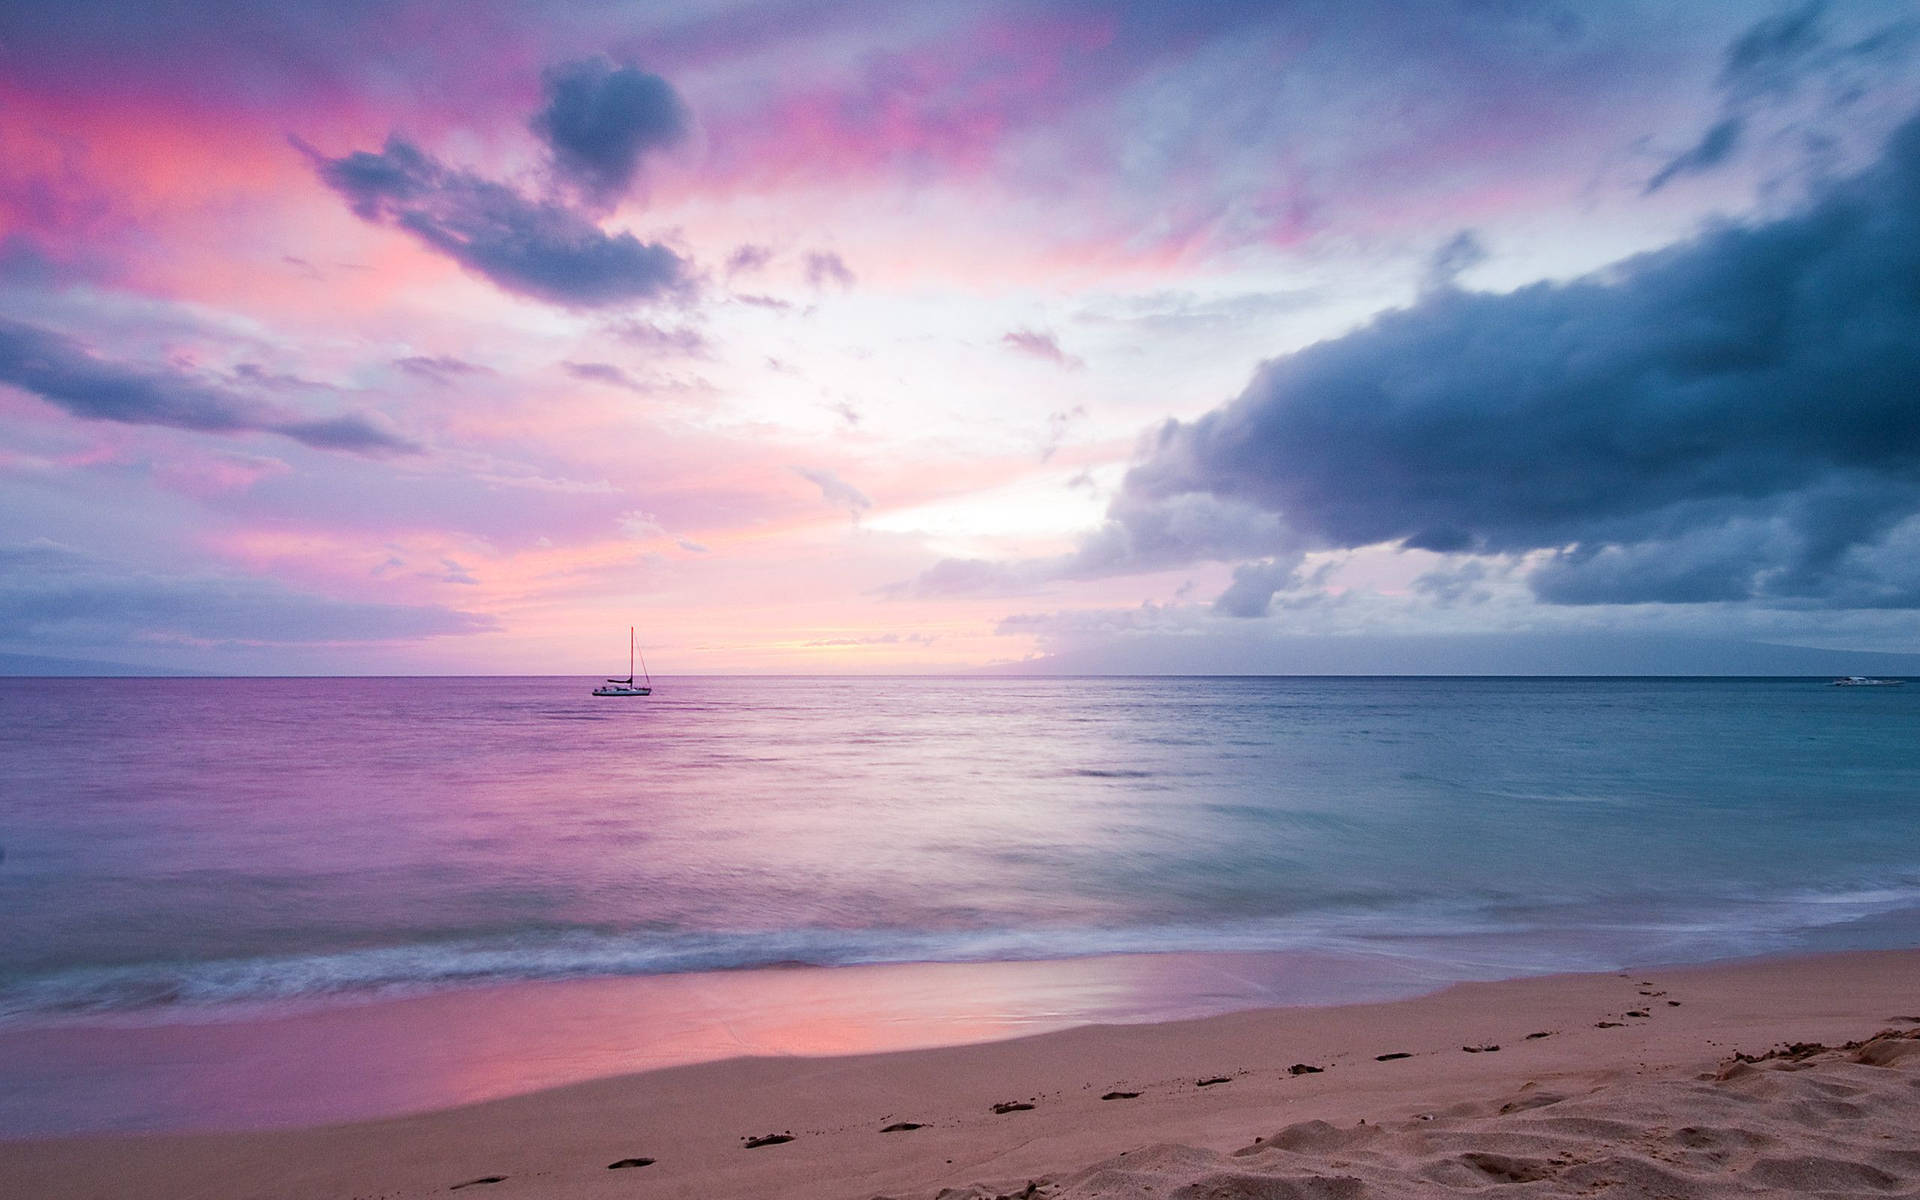 Pink Aesthetic Ocean Sunset With Boat Background